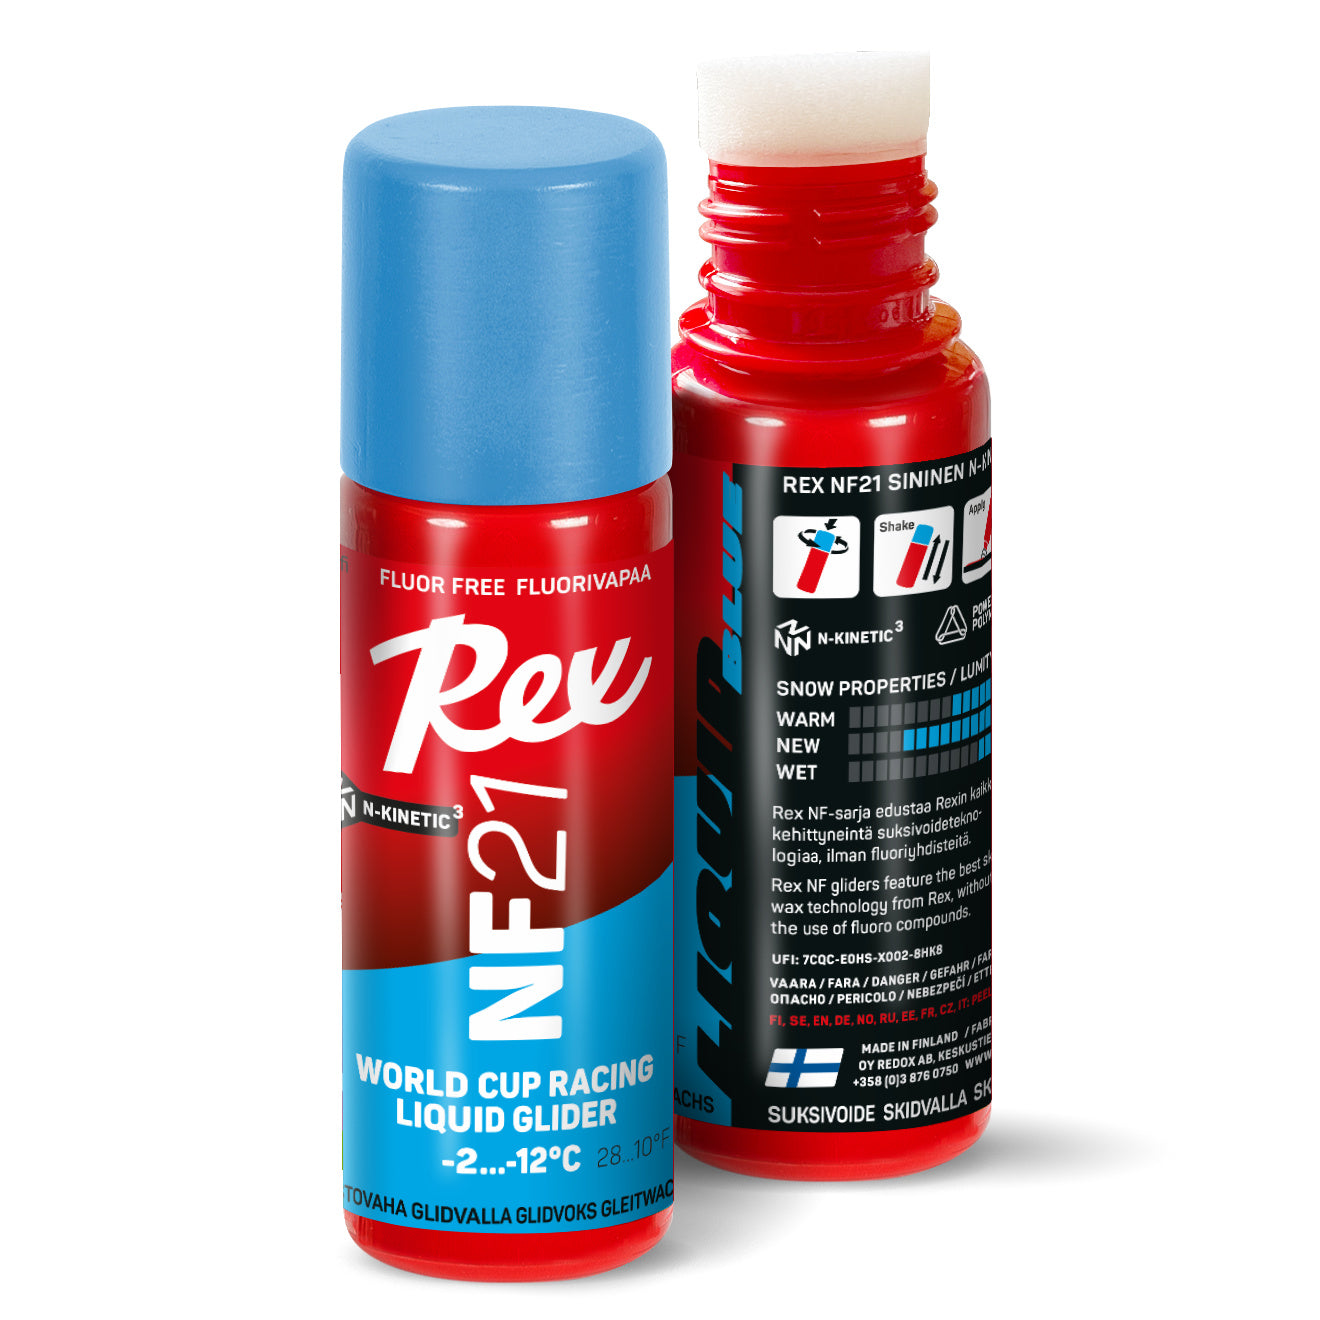 A product picture of the Rex Wax NF21 Blue Liquid Glider (Sponge Applicator)